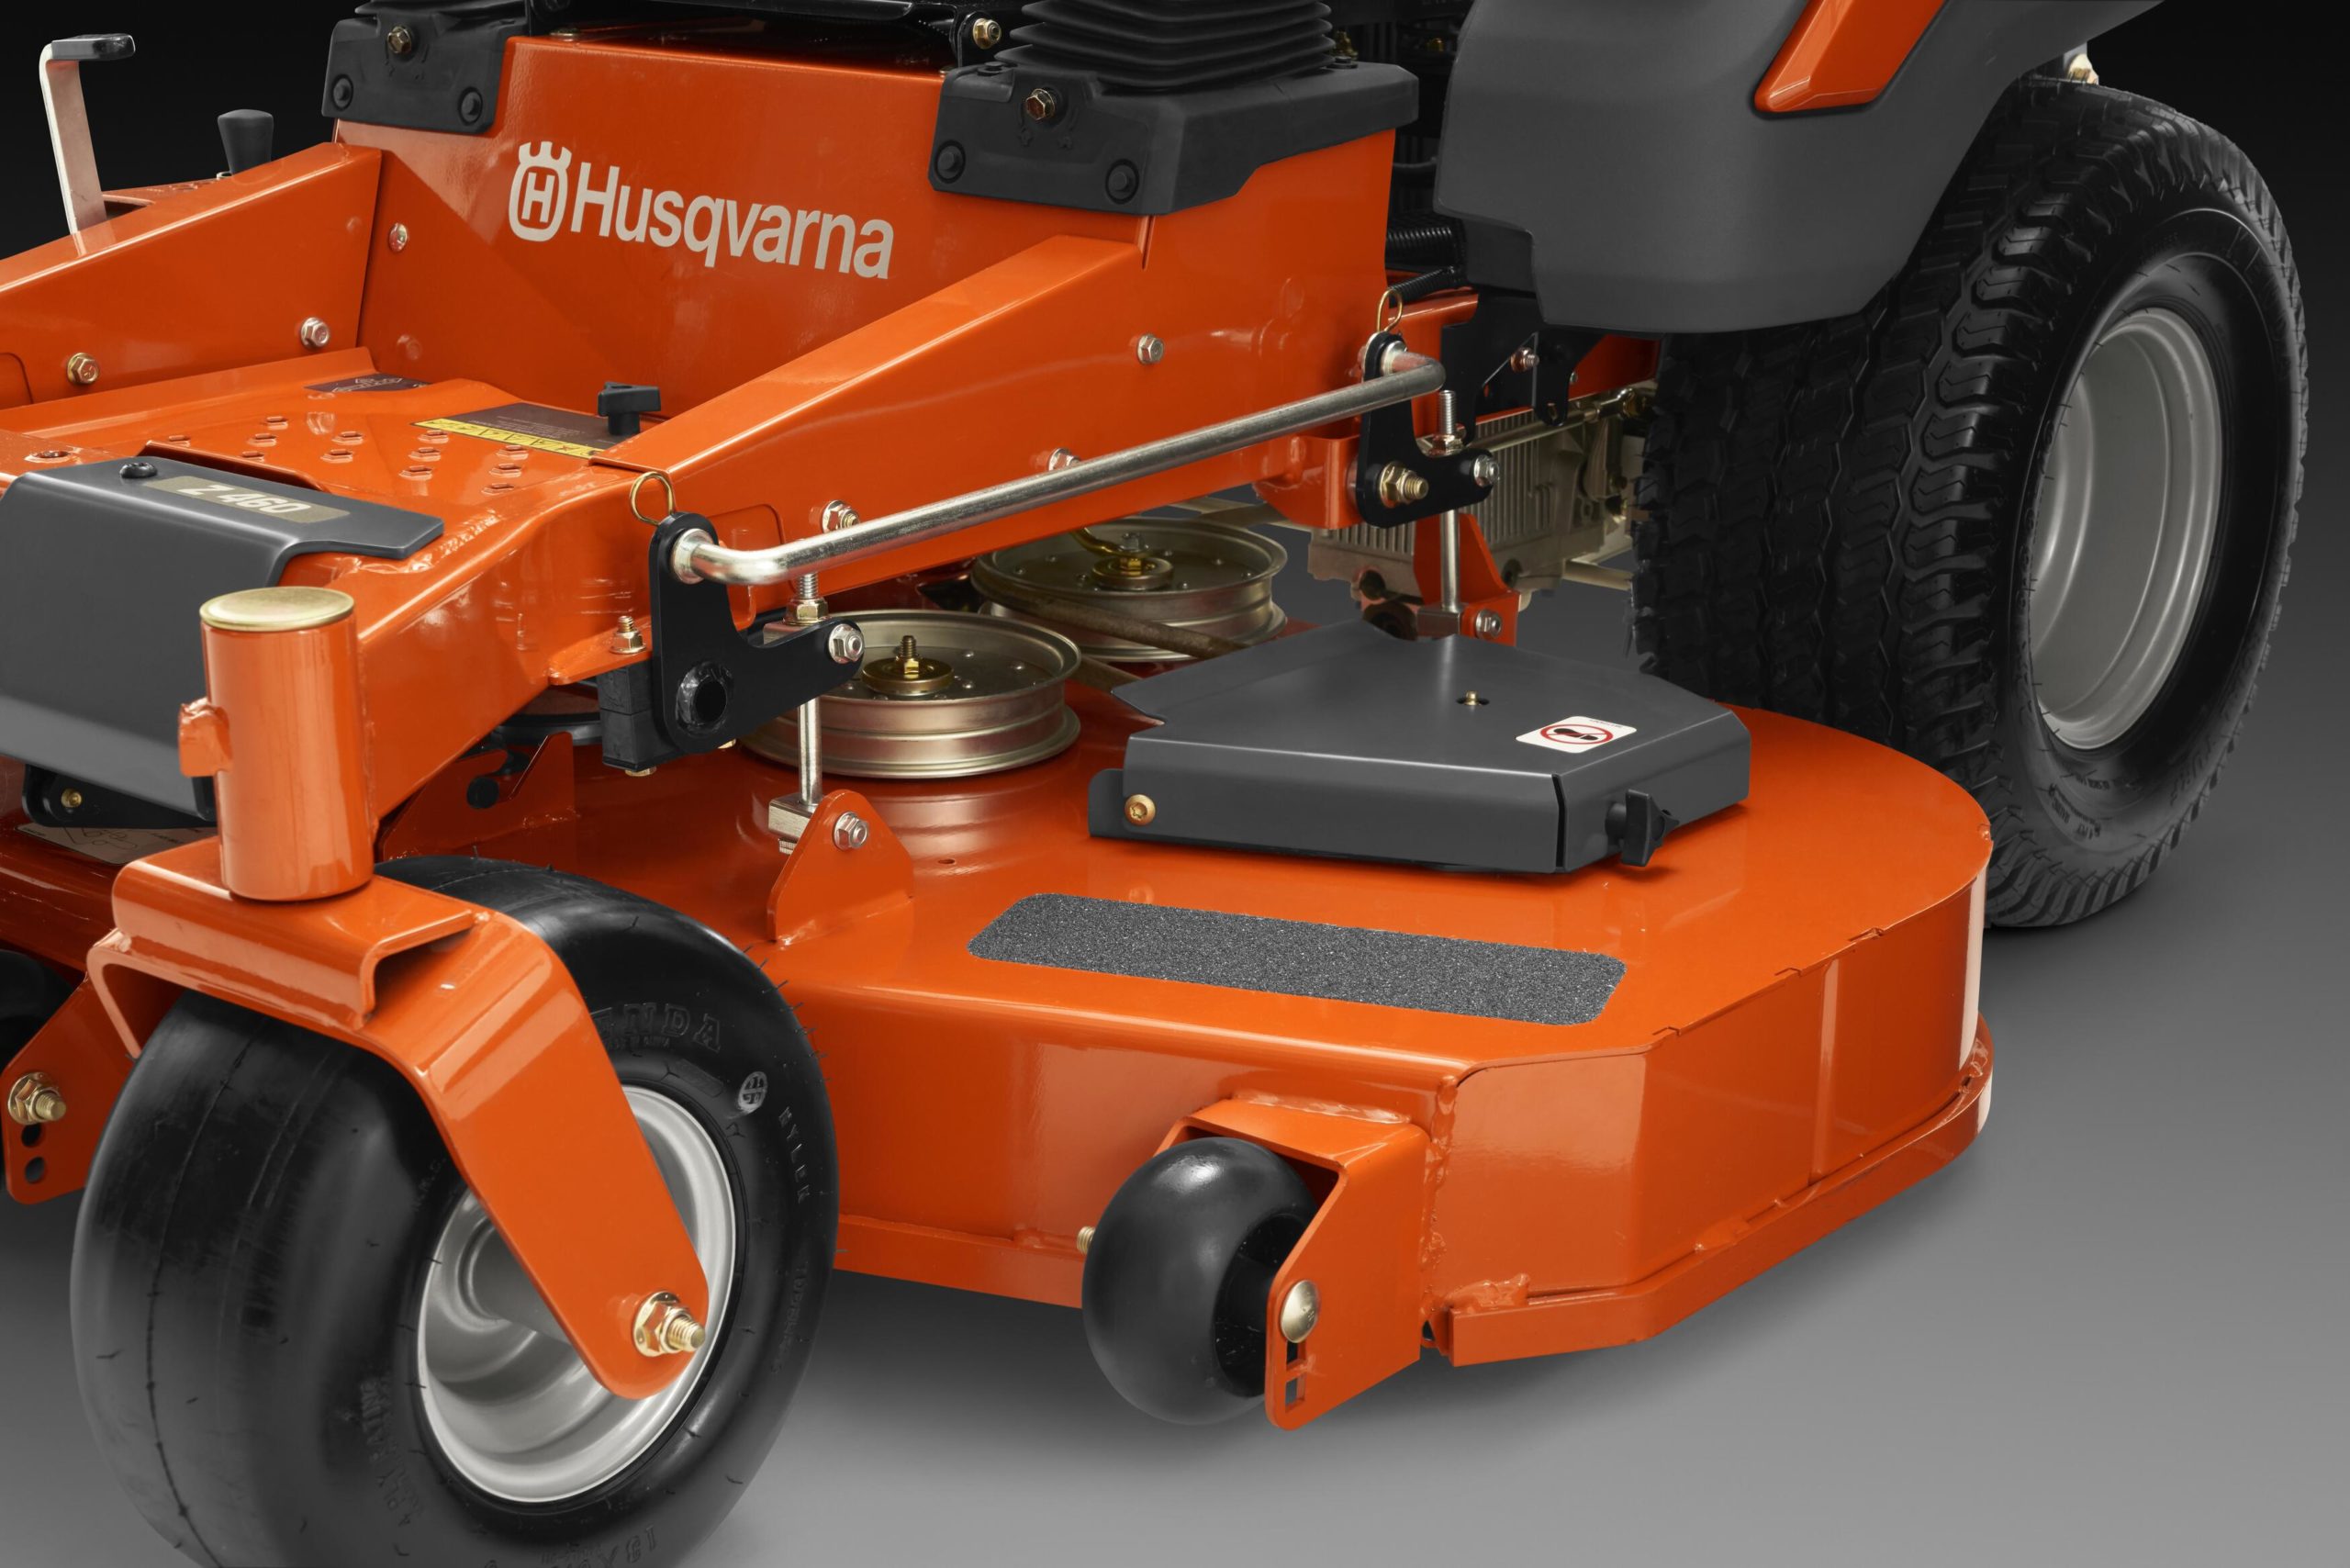  The professional cutting deck is built for rugged operation and a high degree of mowing precision.